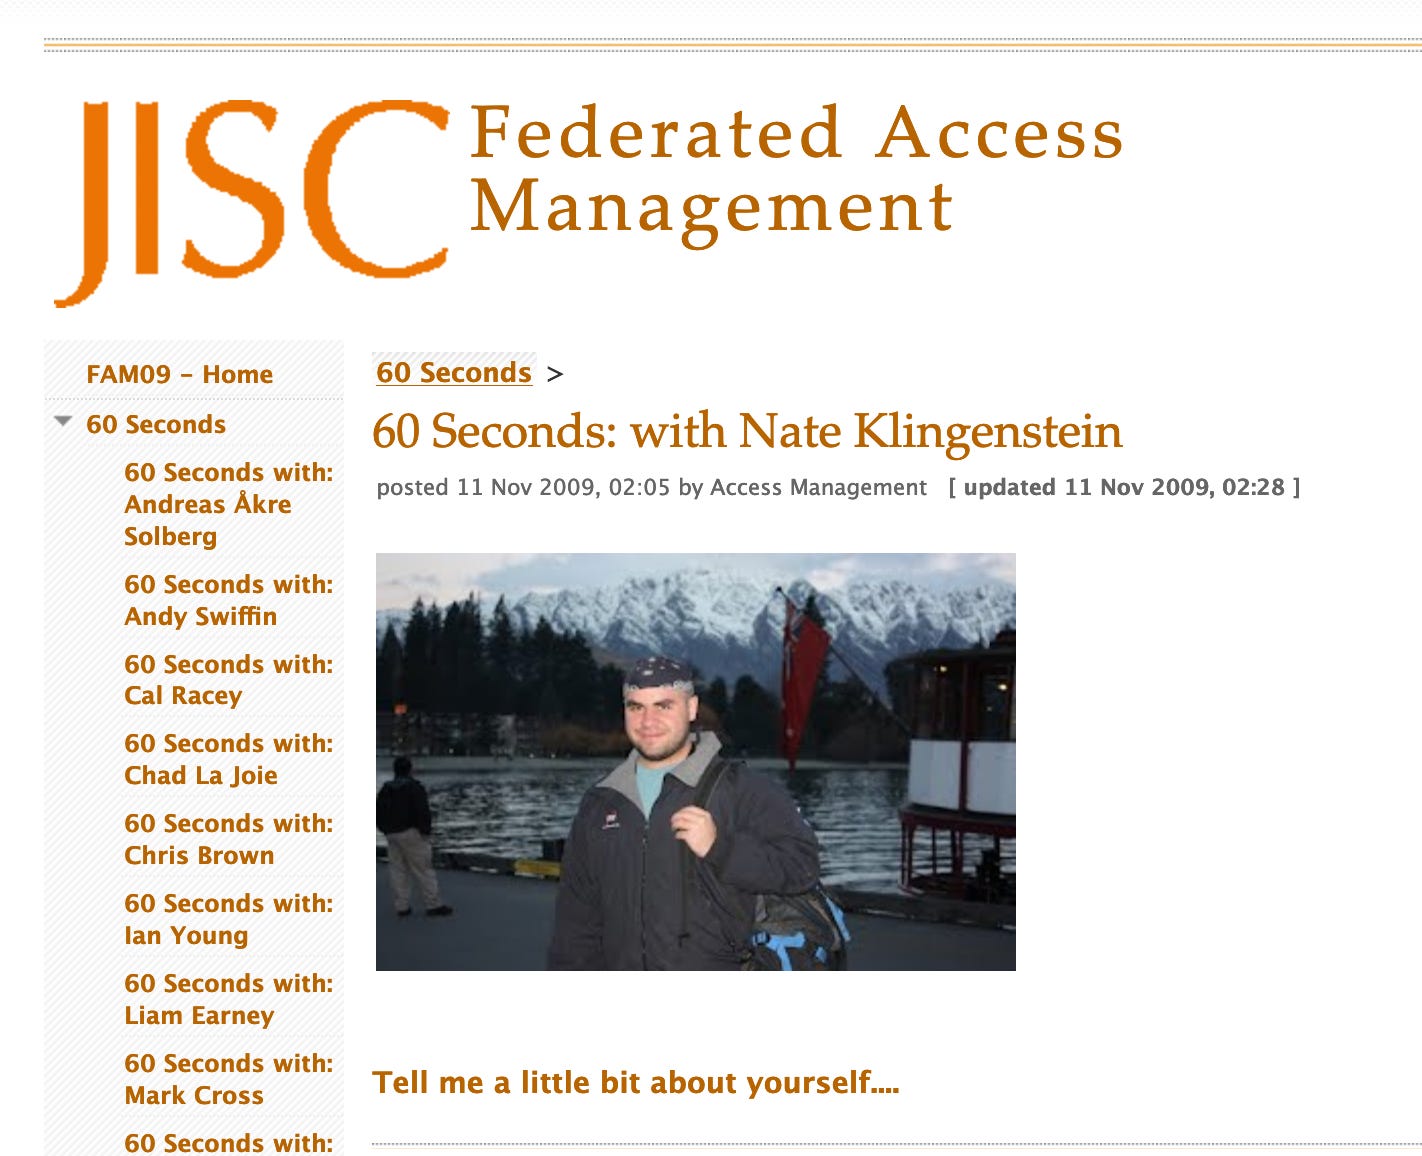 Story from IT publication "60 seconds with Nate Klingenstein"